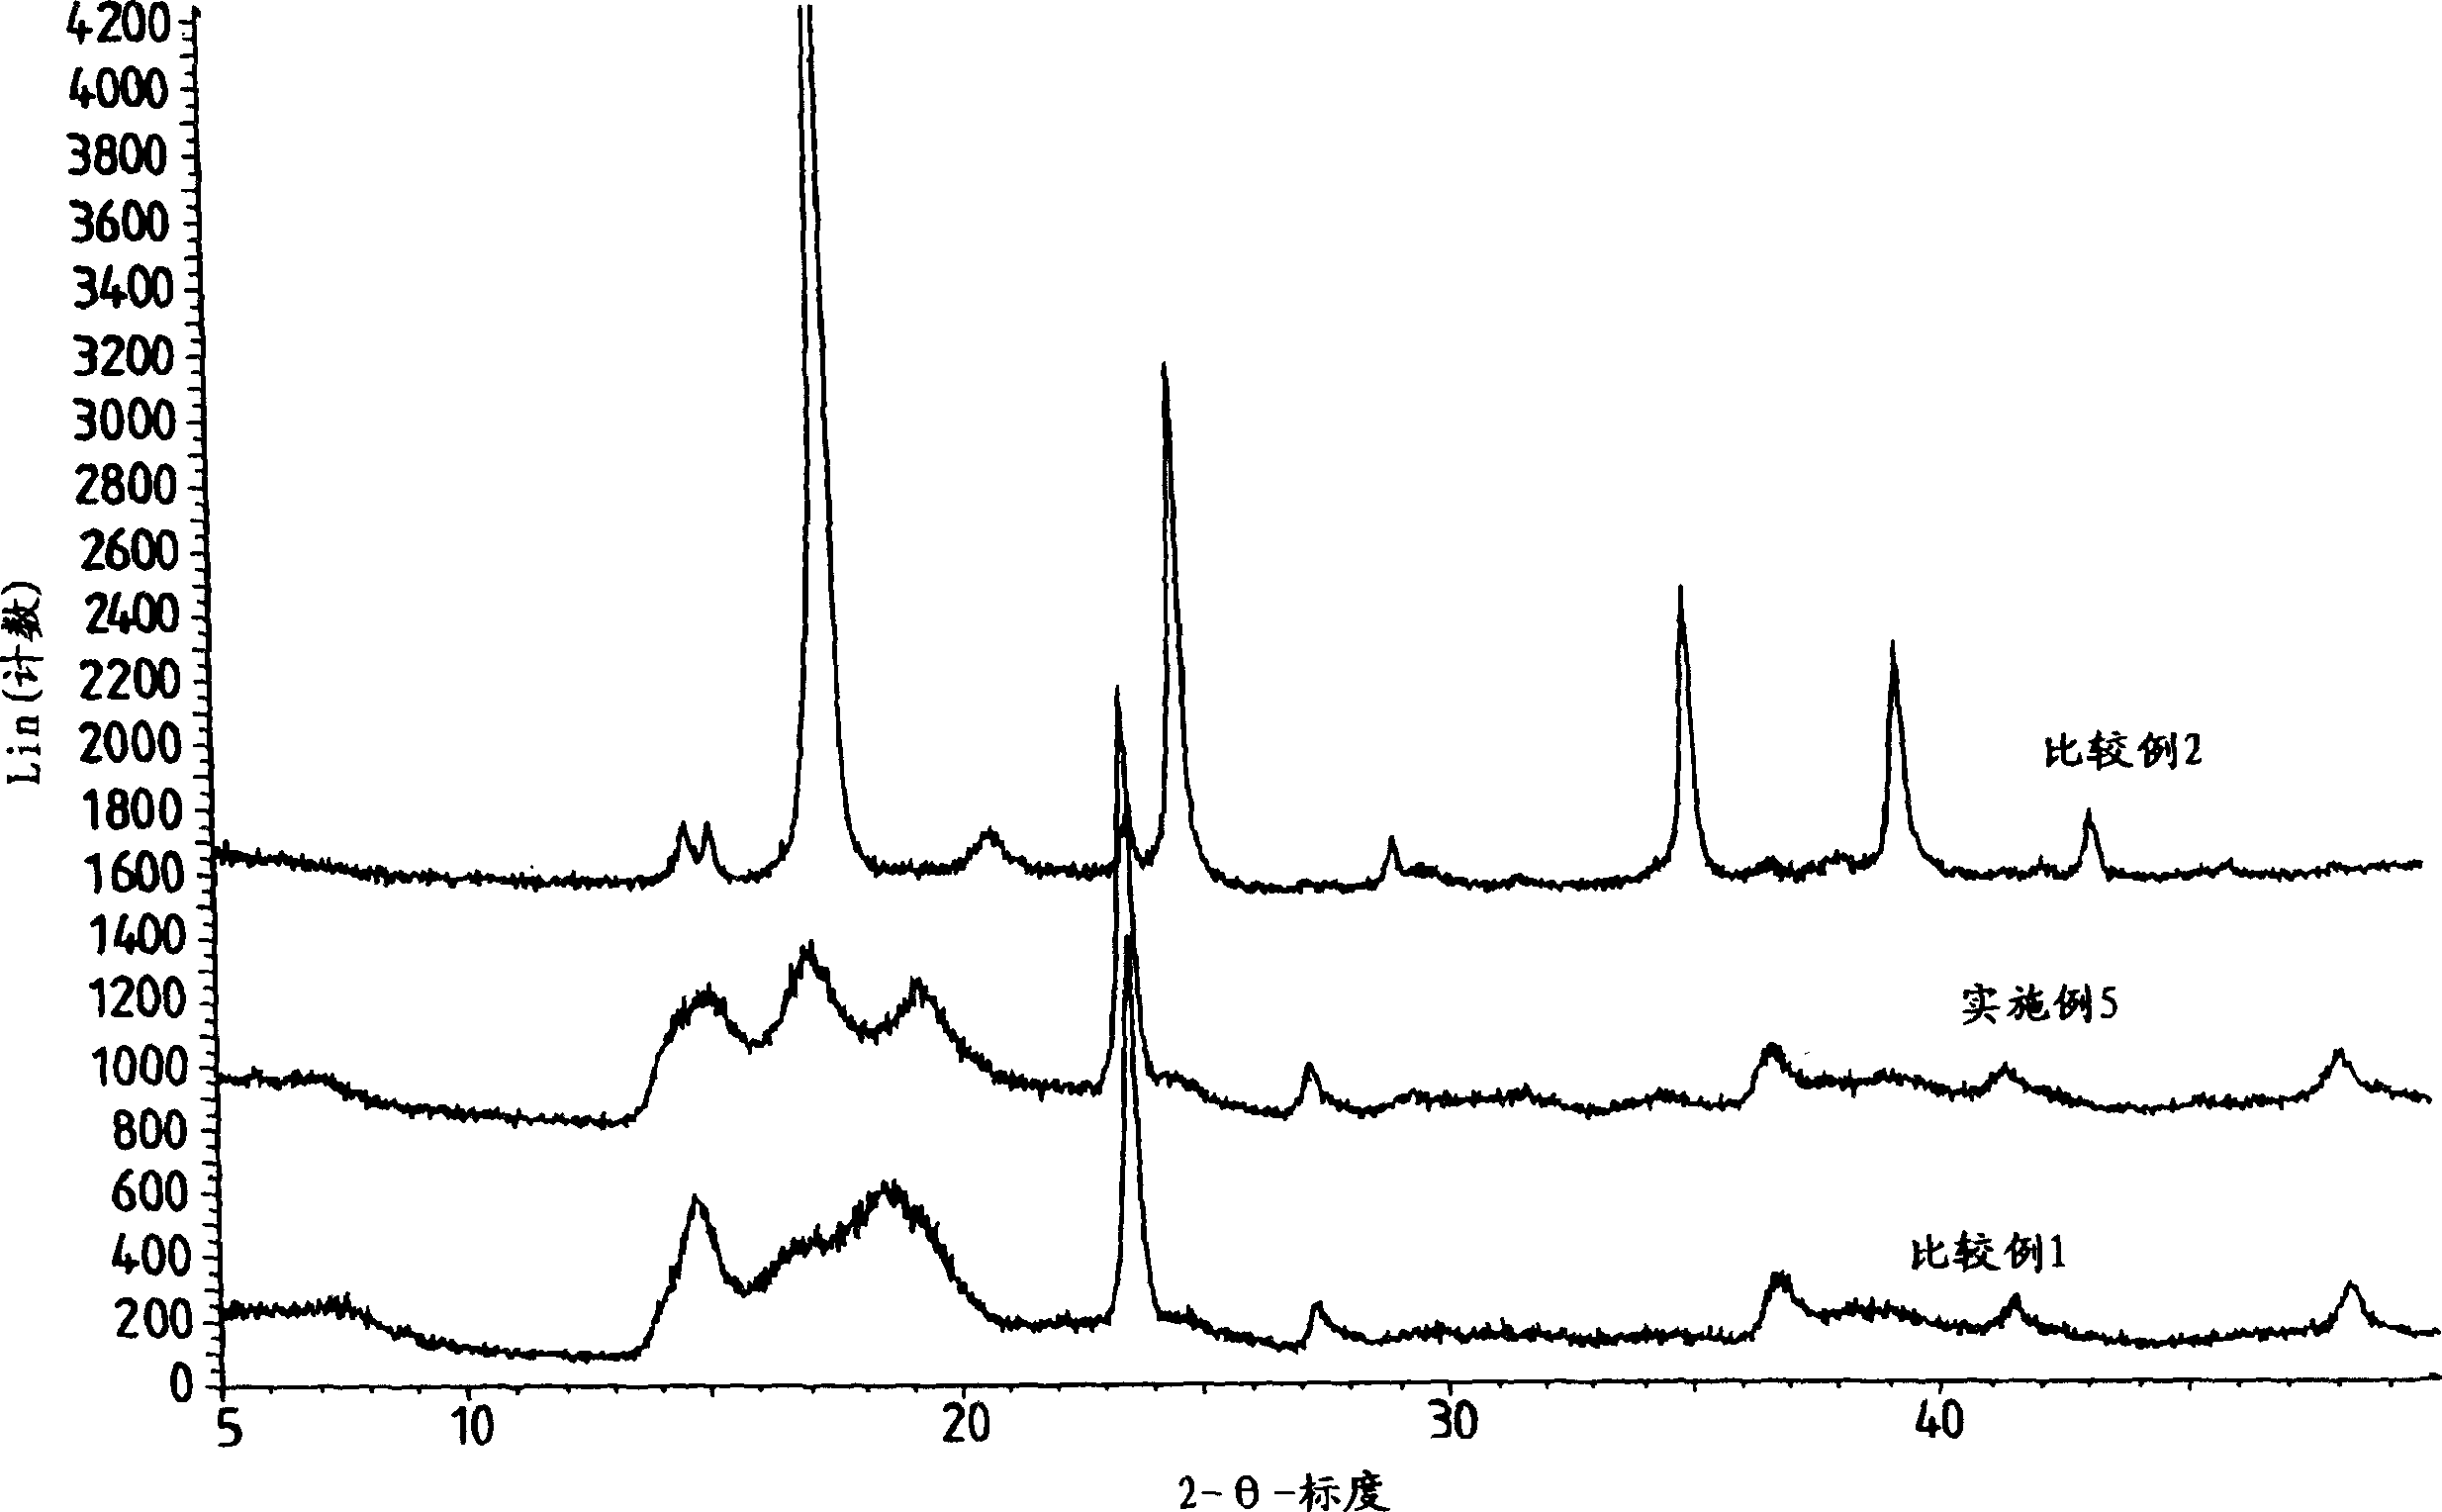 Process for preparation of double metal cyanide (DMC) catalyst